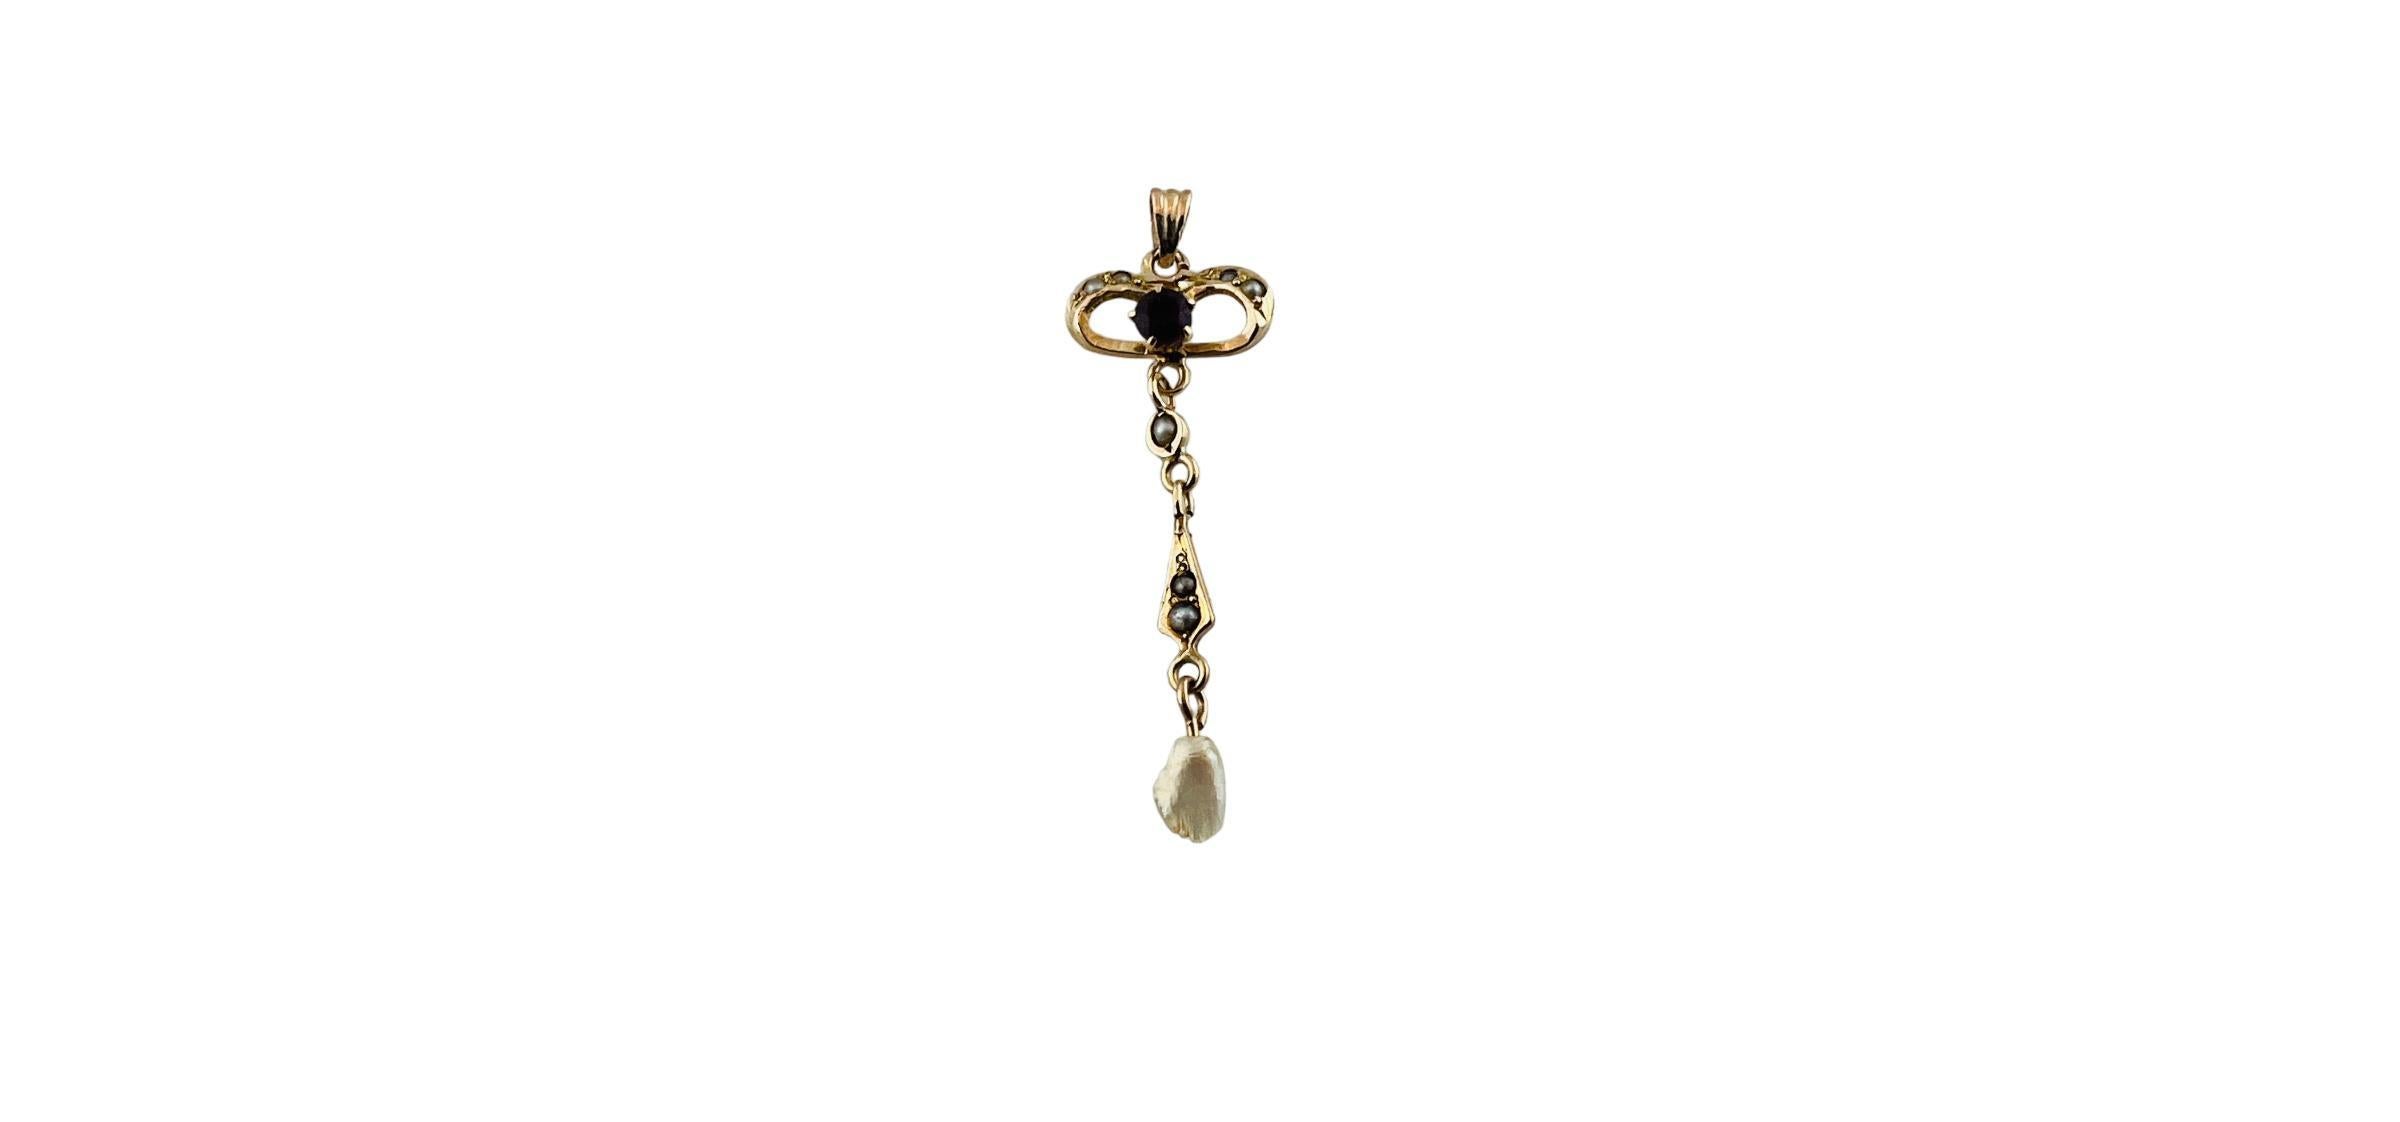 This delicate yellow gold pendant is set with a faceted round purple stone

The open dangle design is accented with white and grey seed pearls

Stamped 10K

Pendant measures 35.2 x 10.8 x 3.6 mm

0.4 g / 0.2 dwt

*Chain not included

Very good